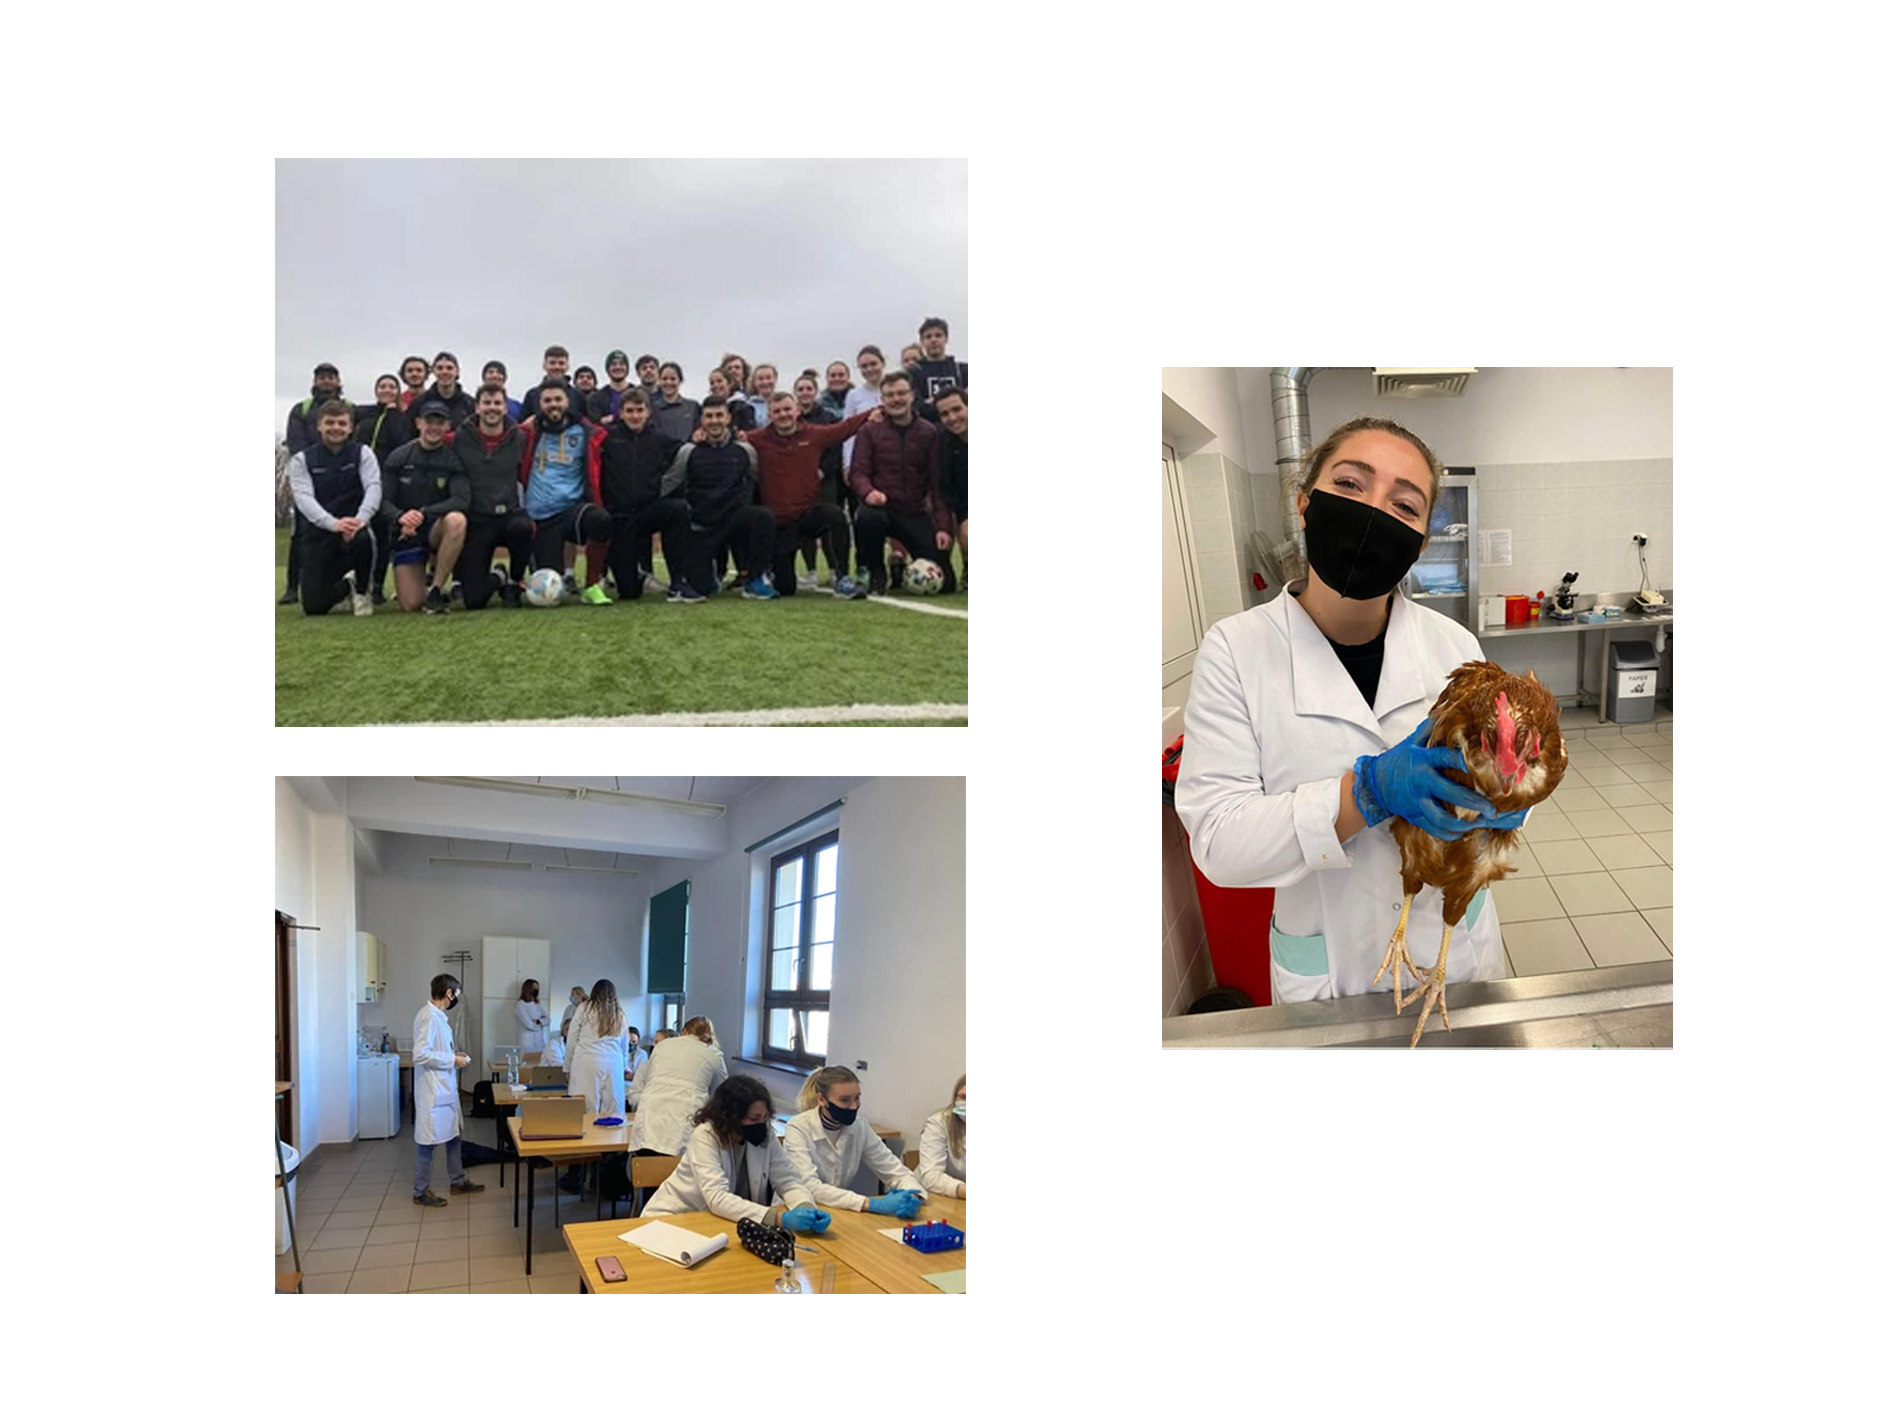 Tina and the football team, in classes and with a hen